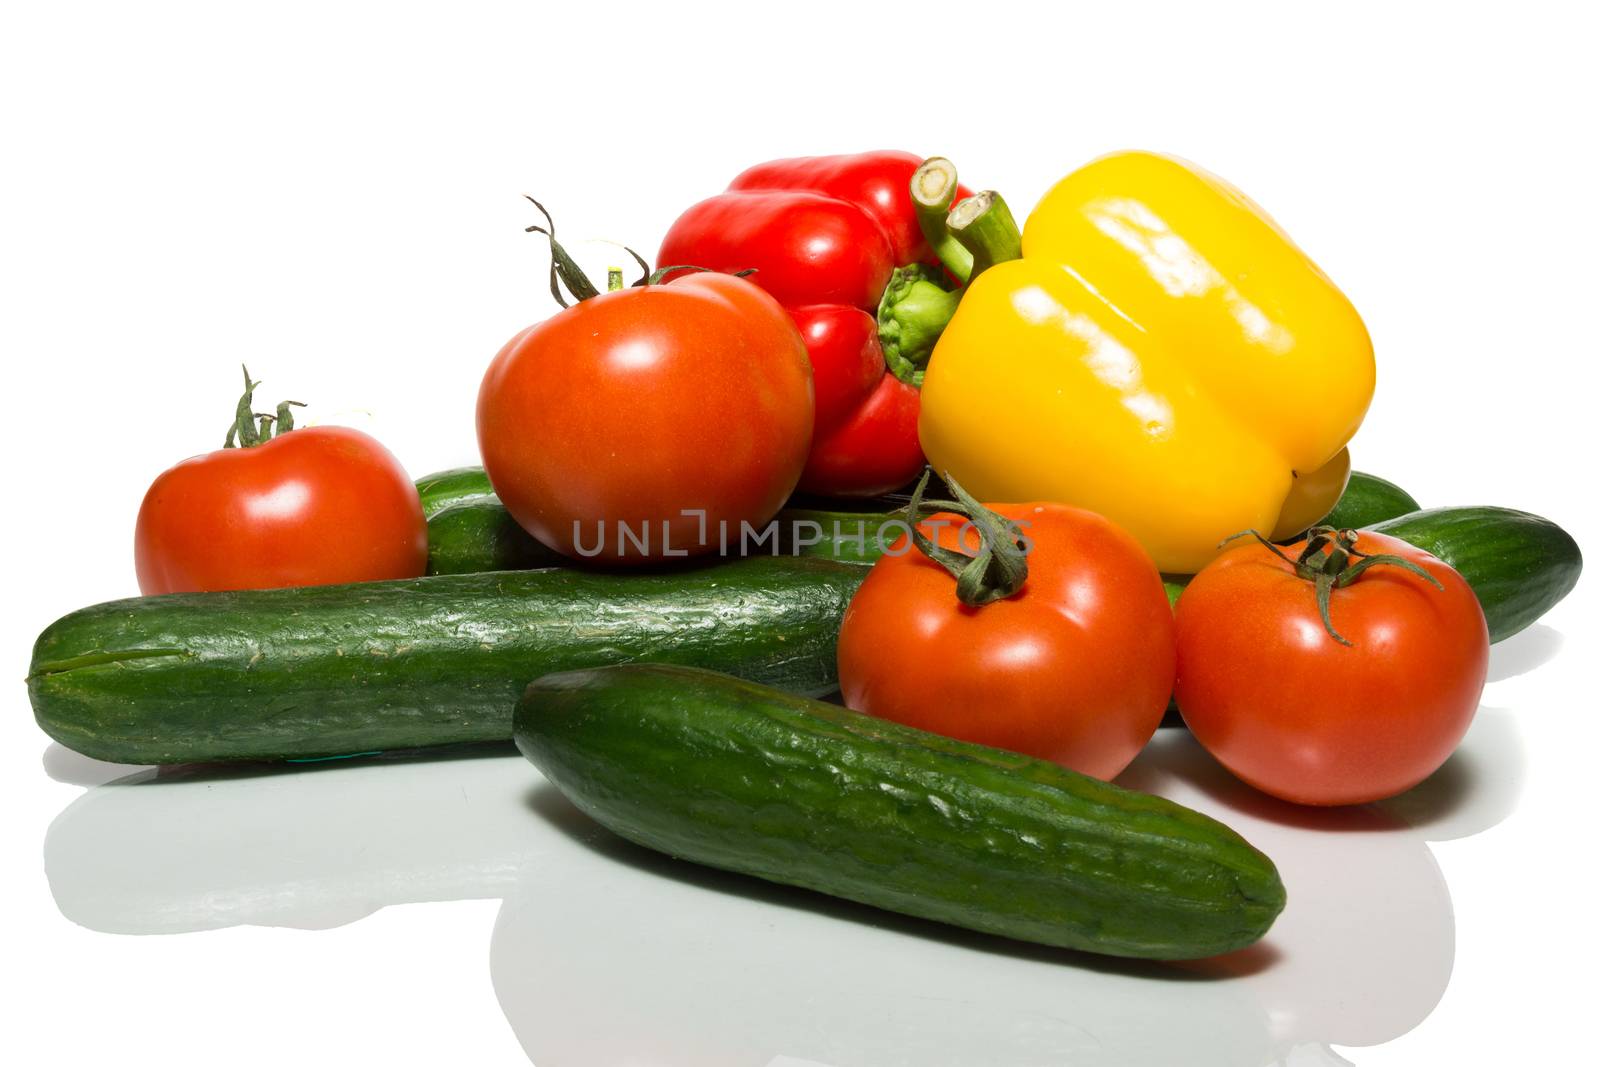 The photo shows the vegetable on a white background